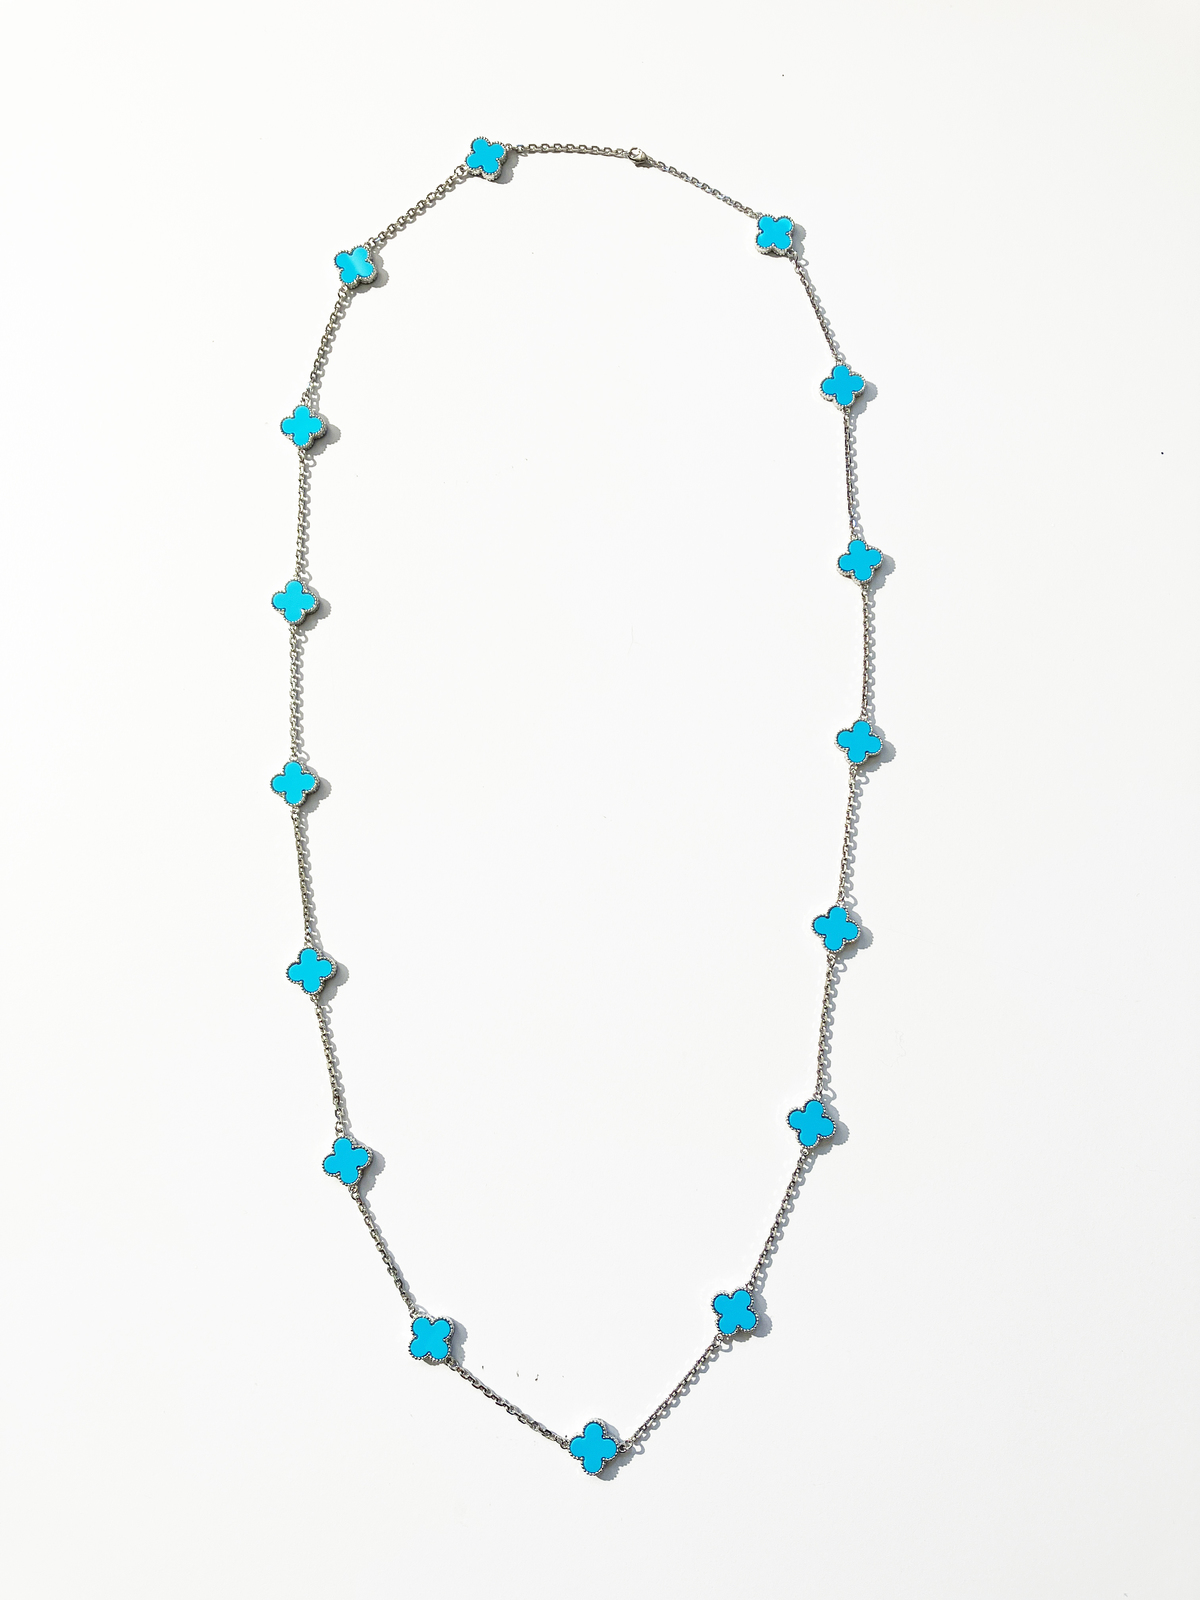 Primary image for Turquoise Quatrefoil Silver Plated Necklace